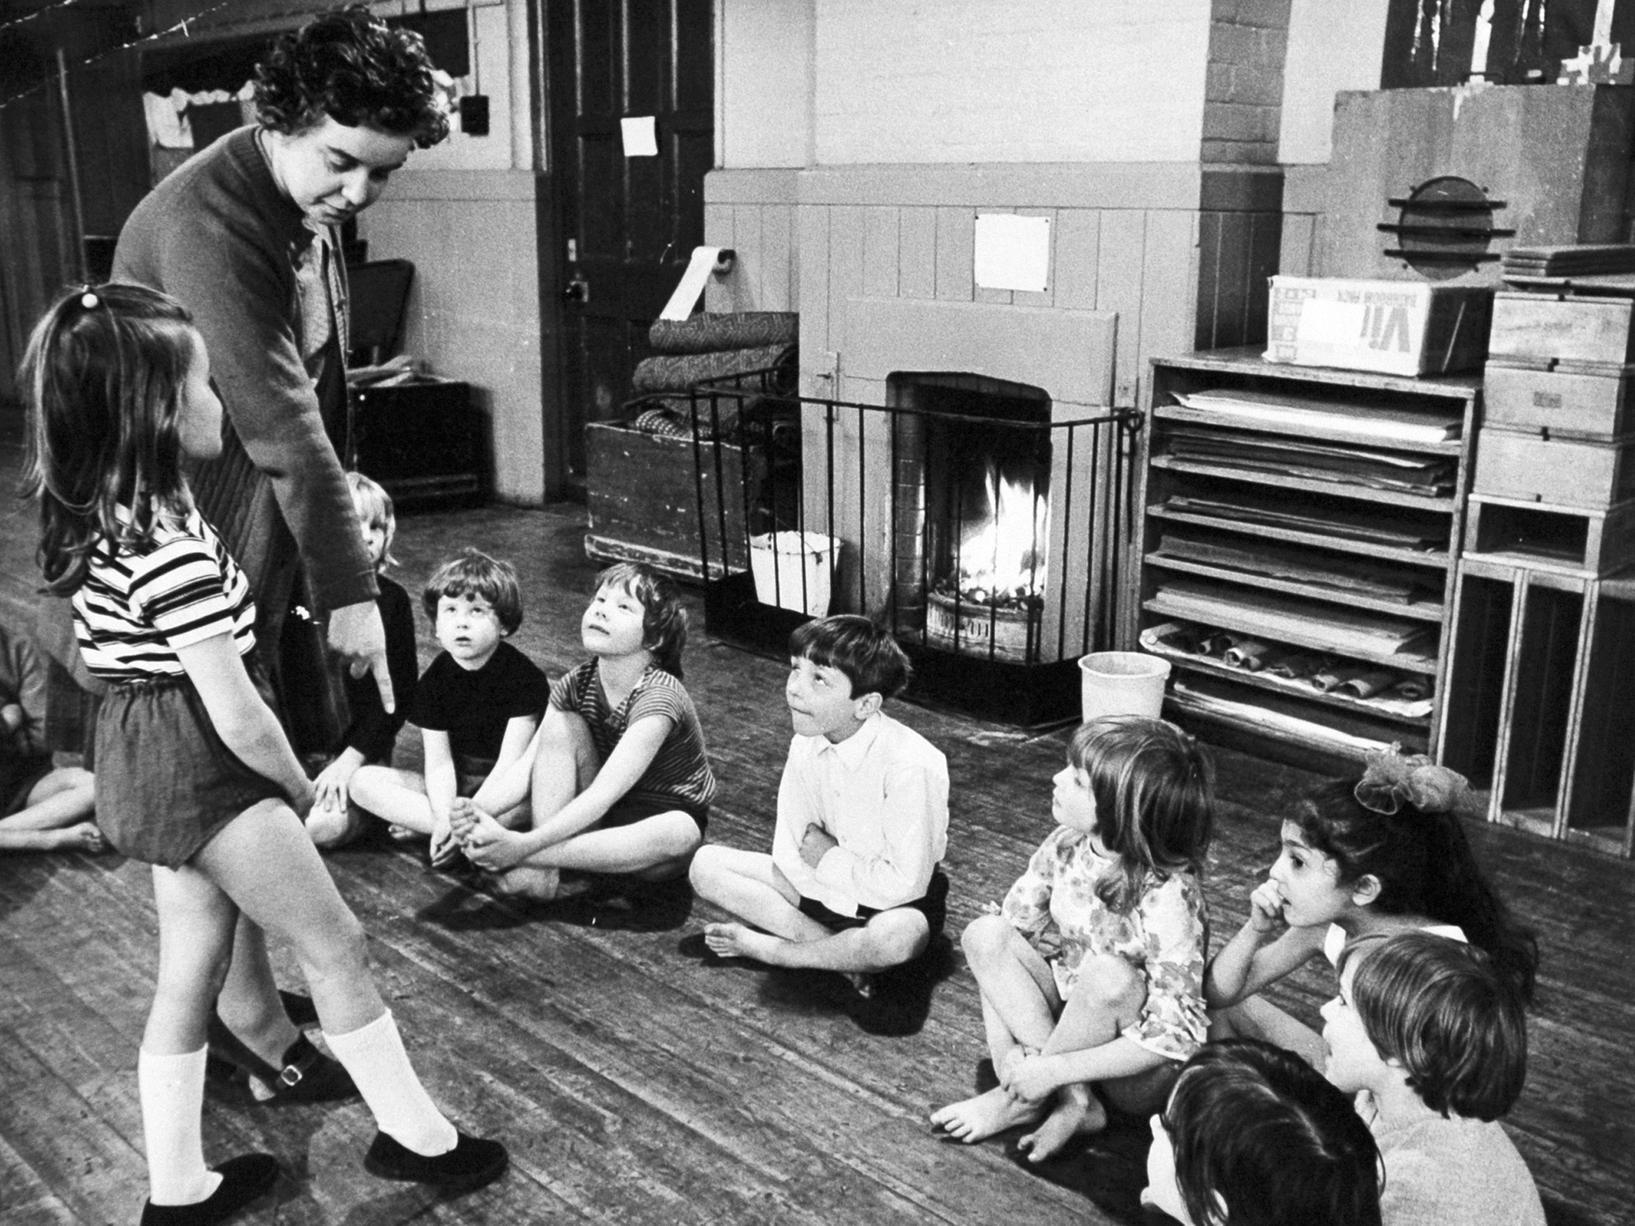 A teacher at Armley Church of England Primary on Wesley Road gives instructions in one of the classrooms heated by an open fire.